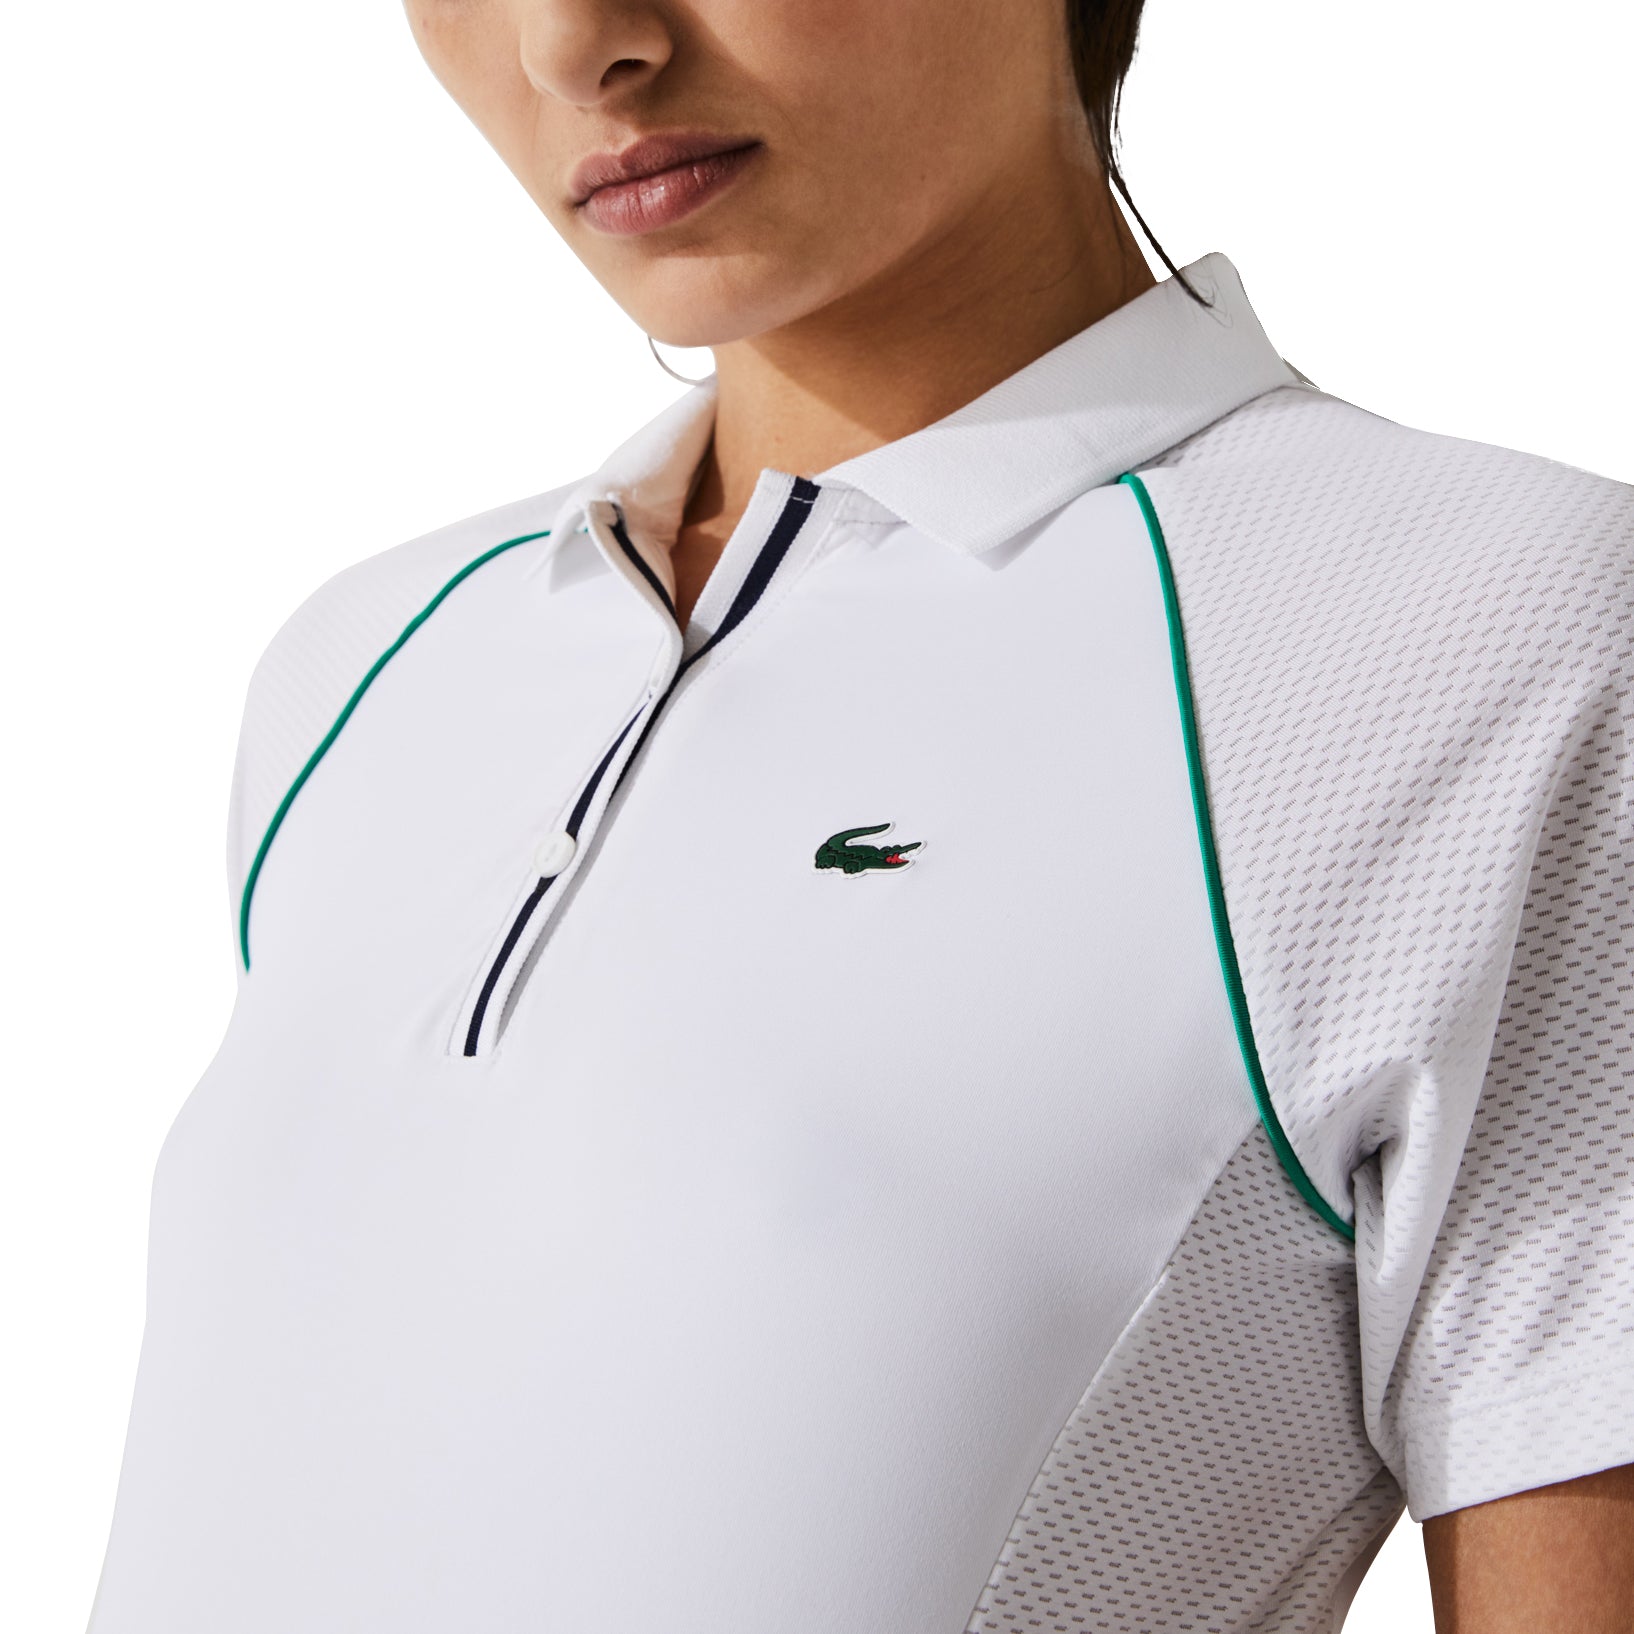 Lacoste Sport Bimaterial Breathable Stretch Tennis Golf Polo 2021 Women